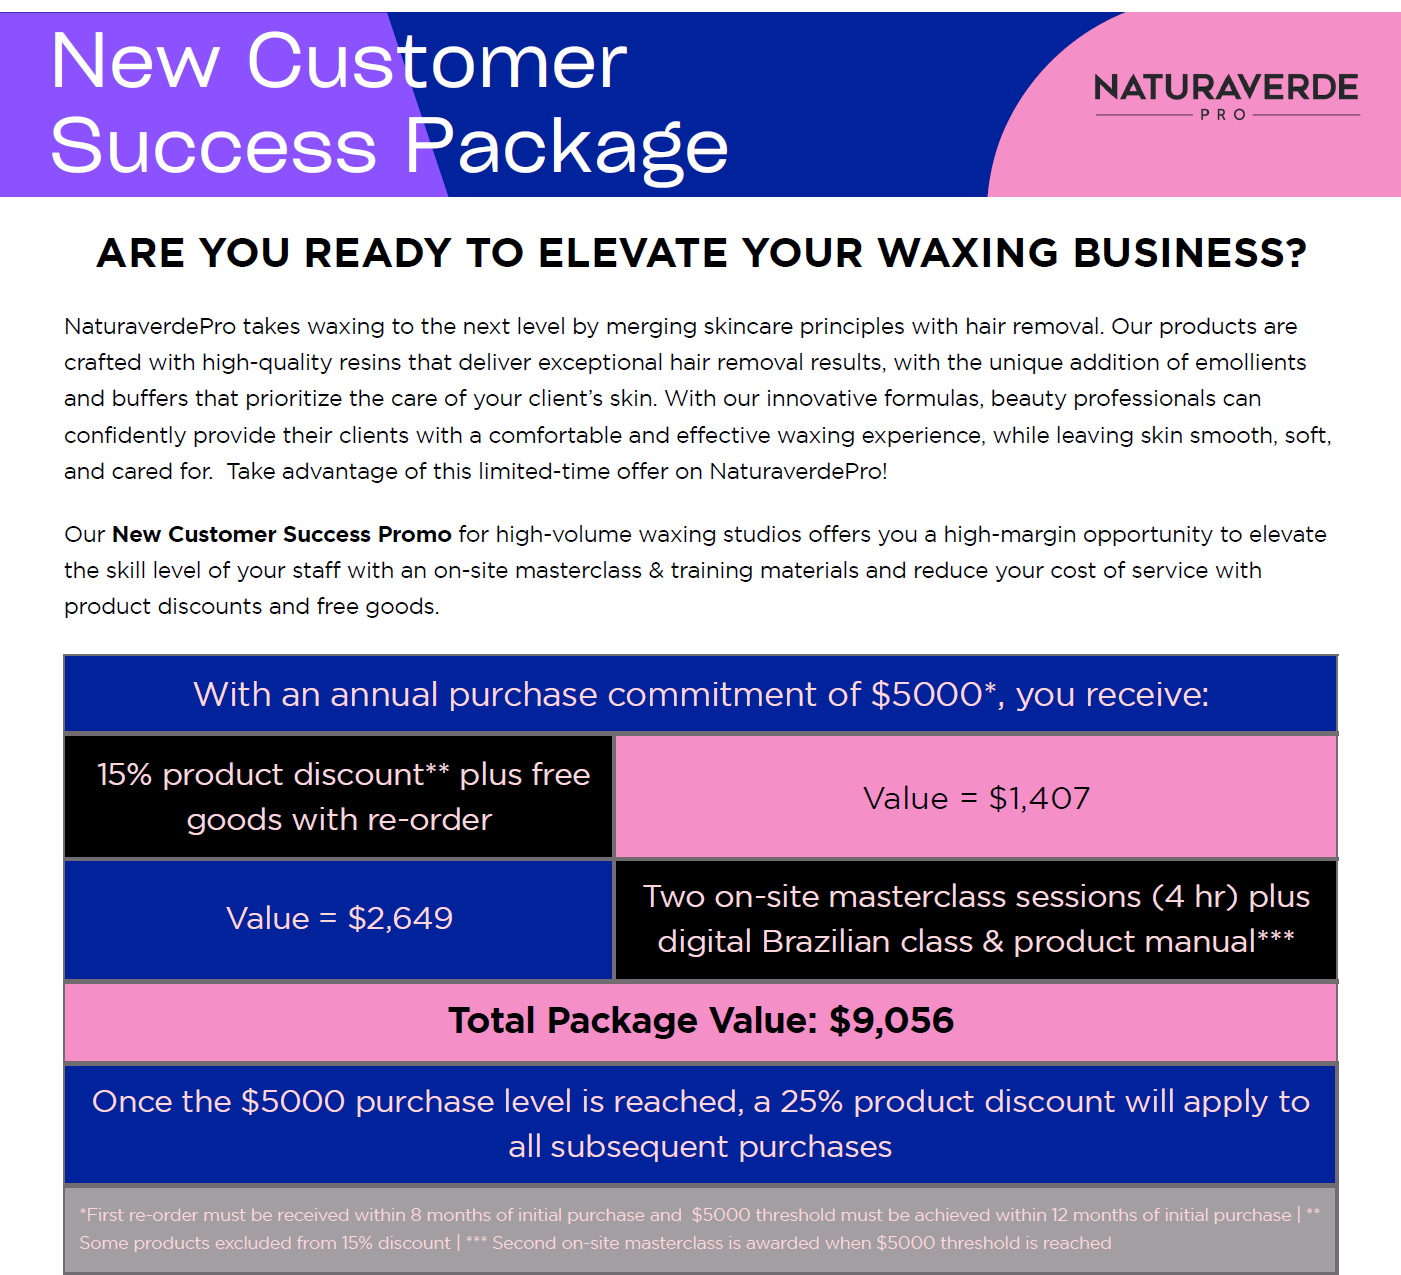 New Customer Success Package